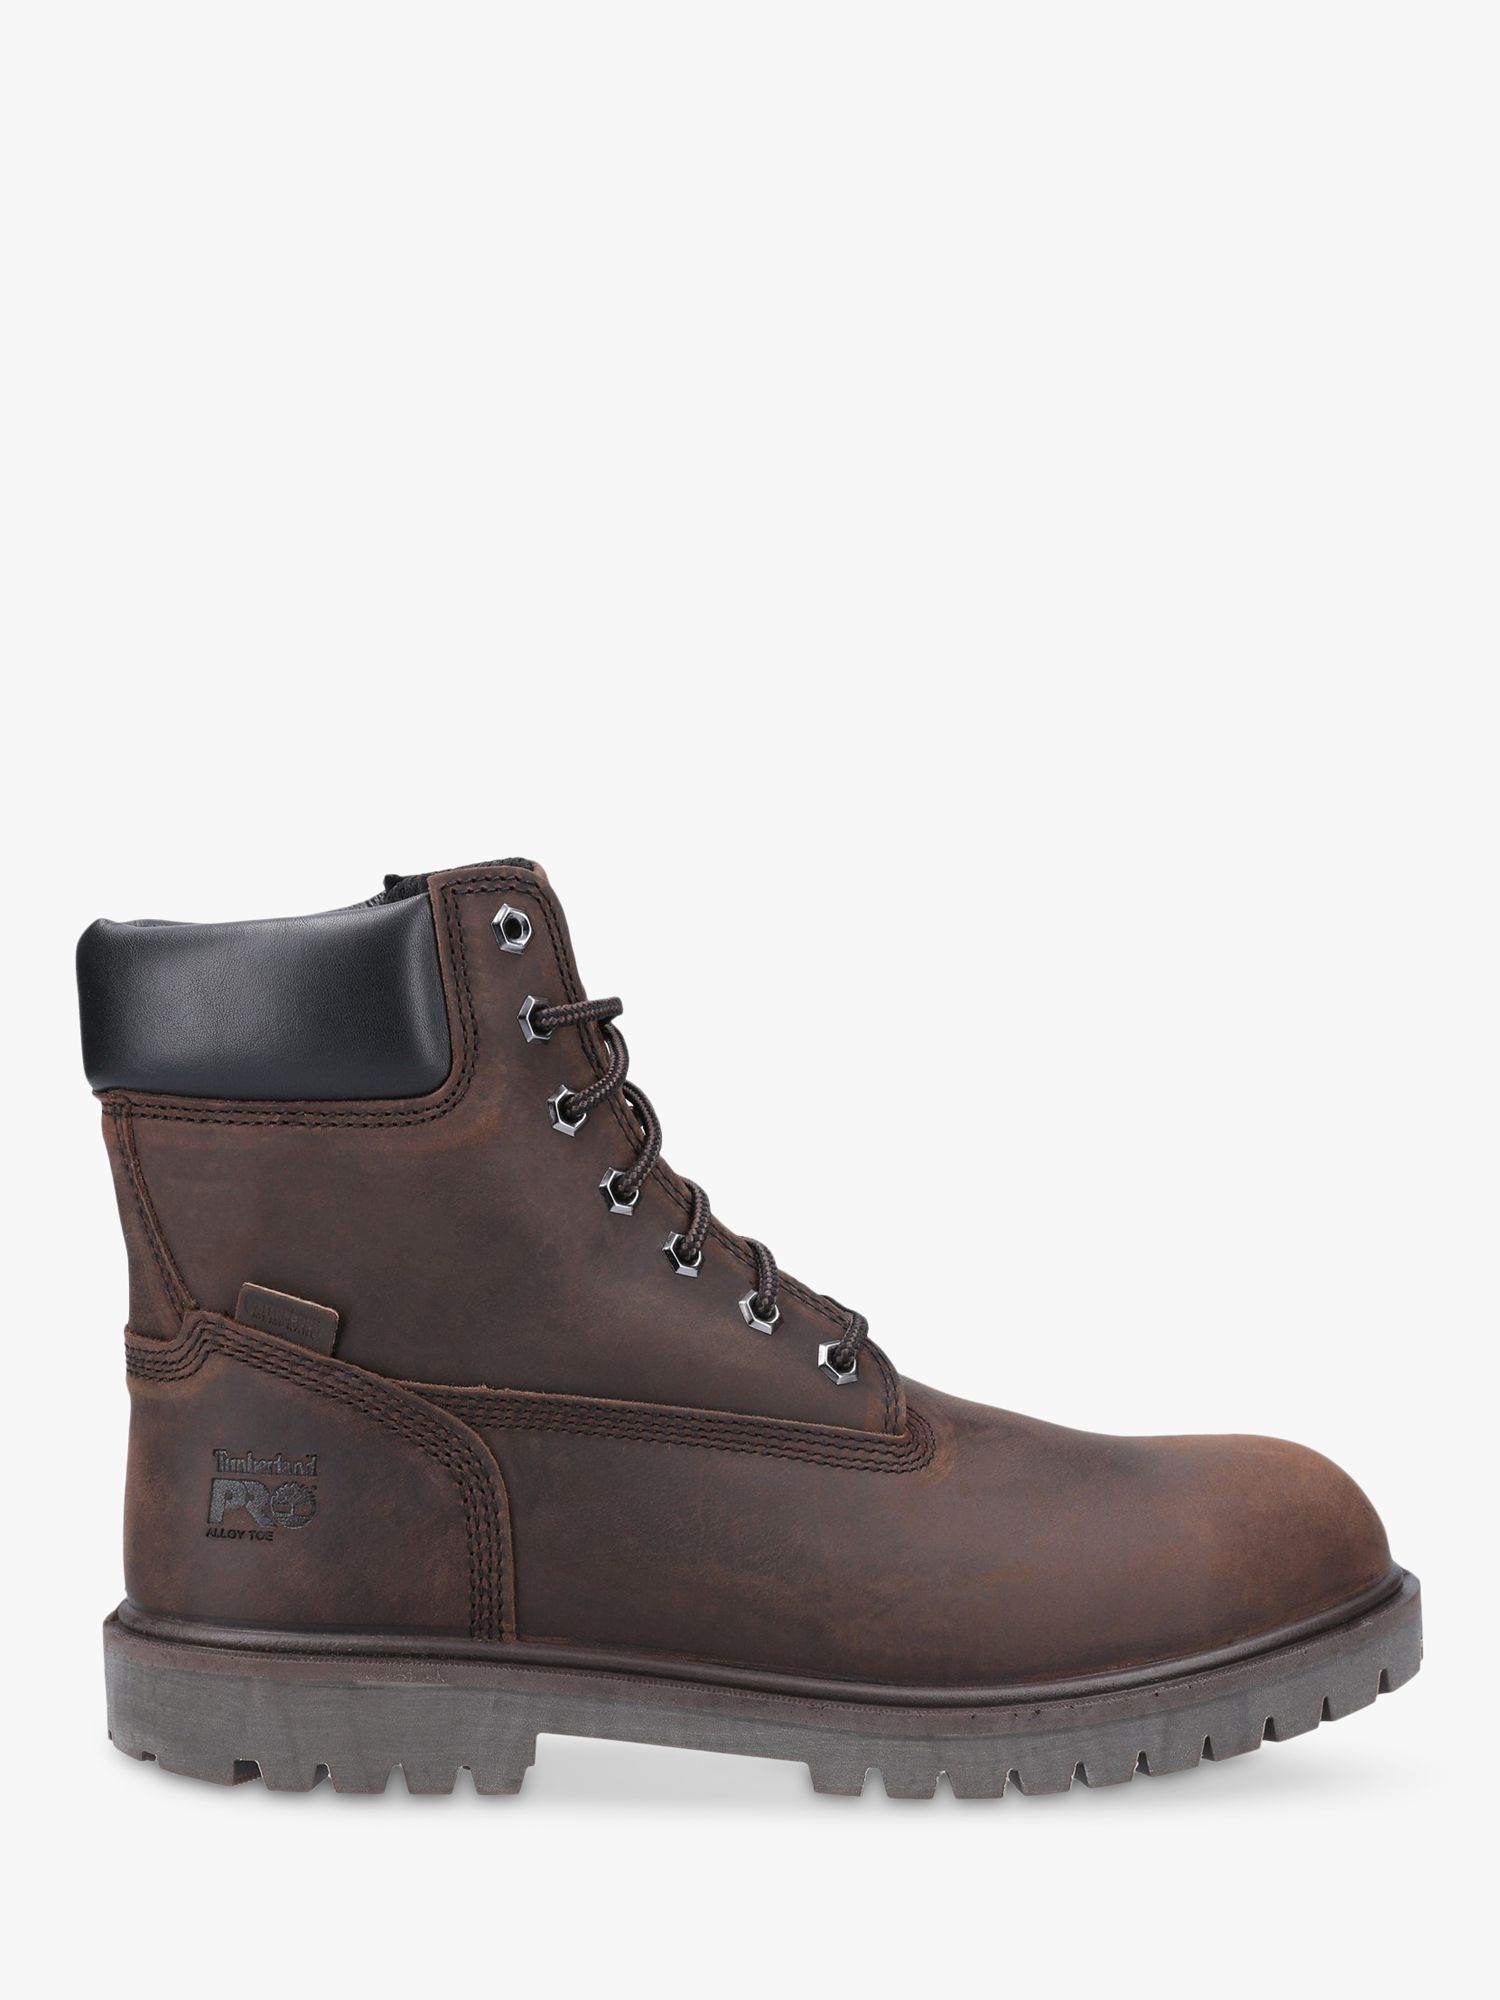 Timberland Pro Iconic Safety Toe Waterproof Work Boots at John Lewis ...